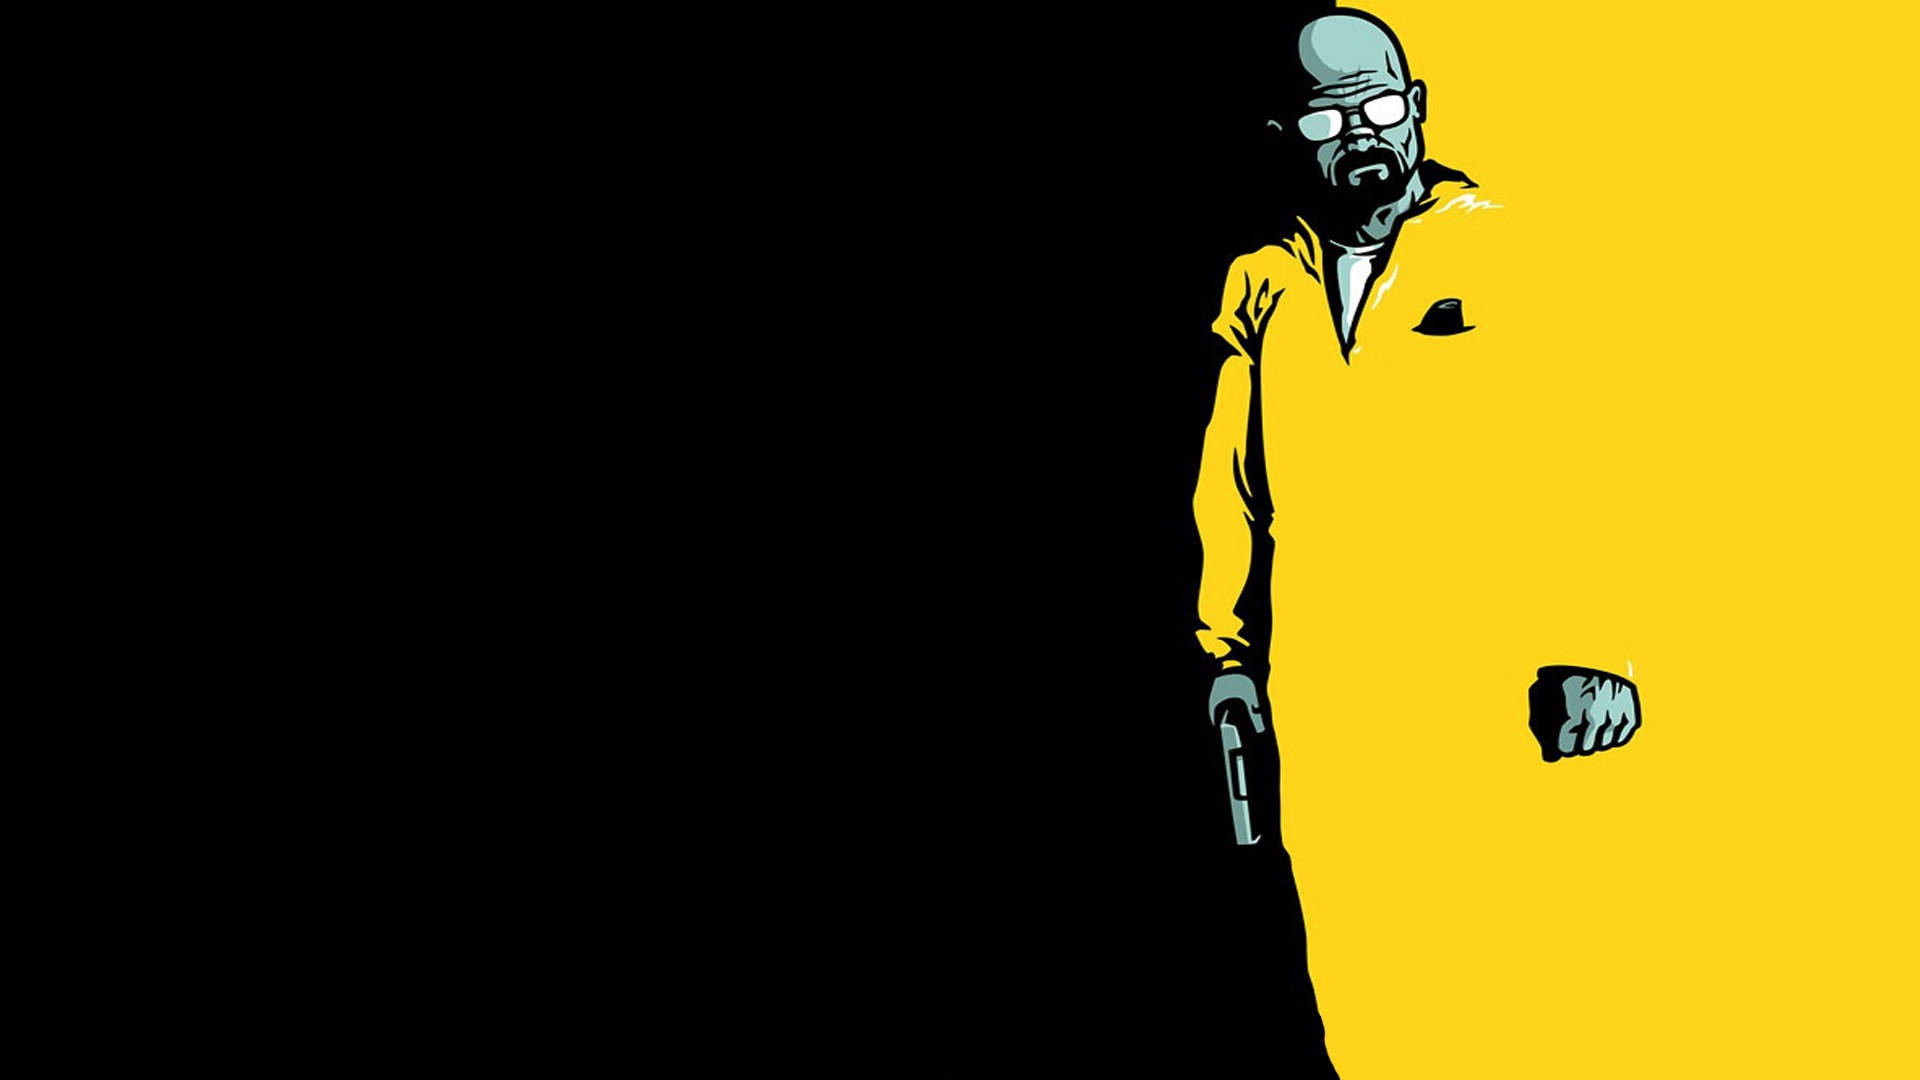 "Breaking Bad's Walter White - The Undisputed Master of Chemistry" Wallpaper